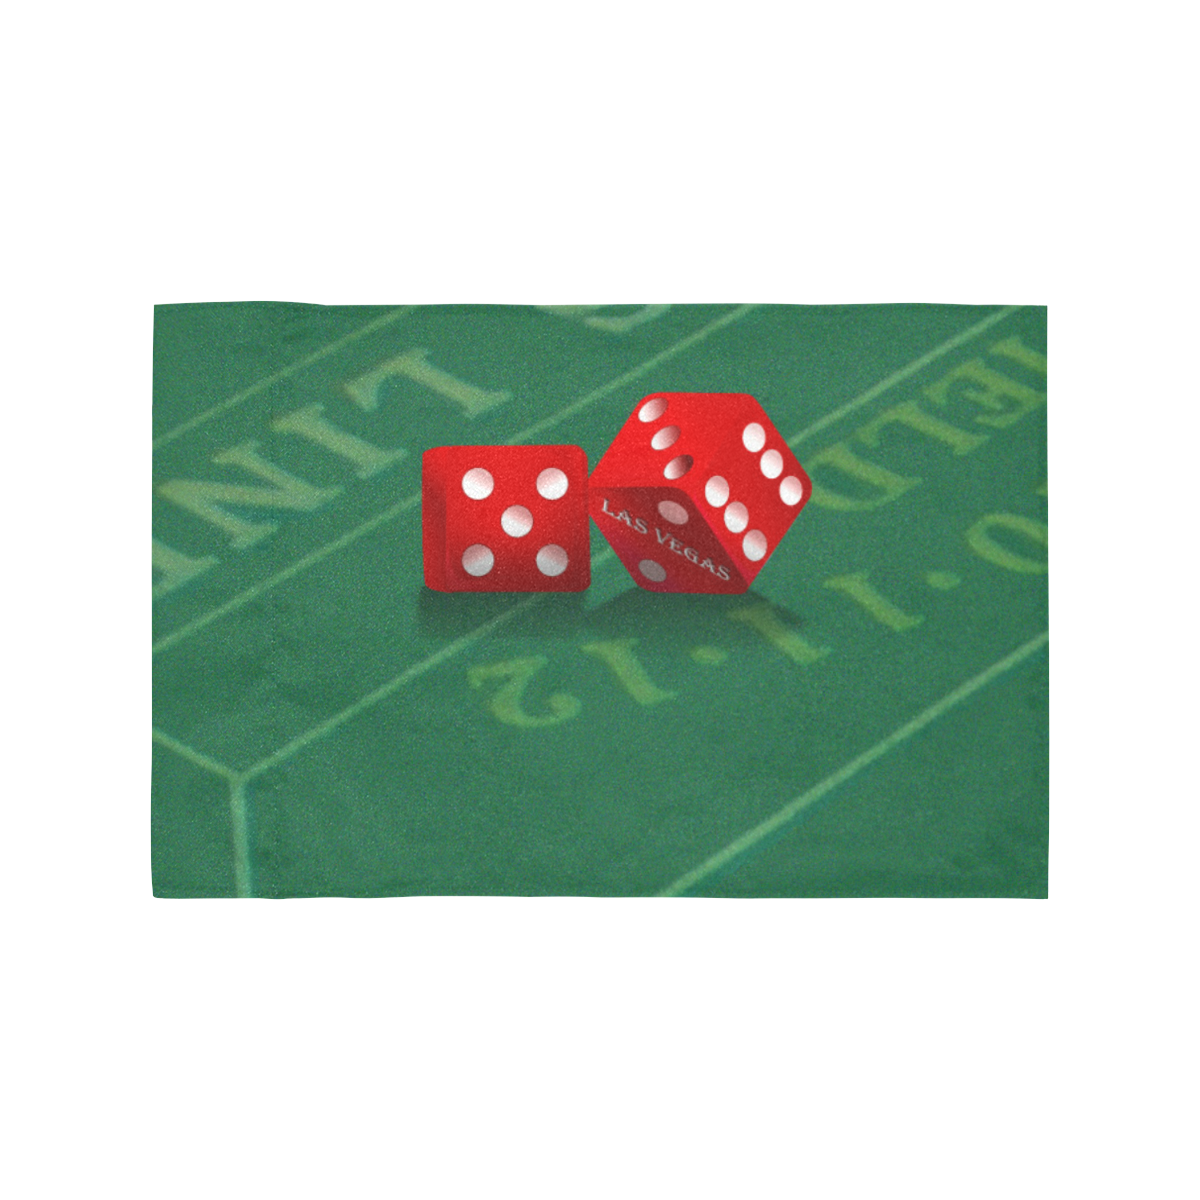 Las Vegas Dice on Craps Table Motorcycle Flag (Twin Sides)